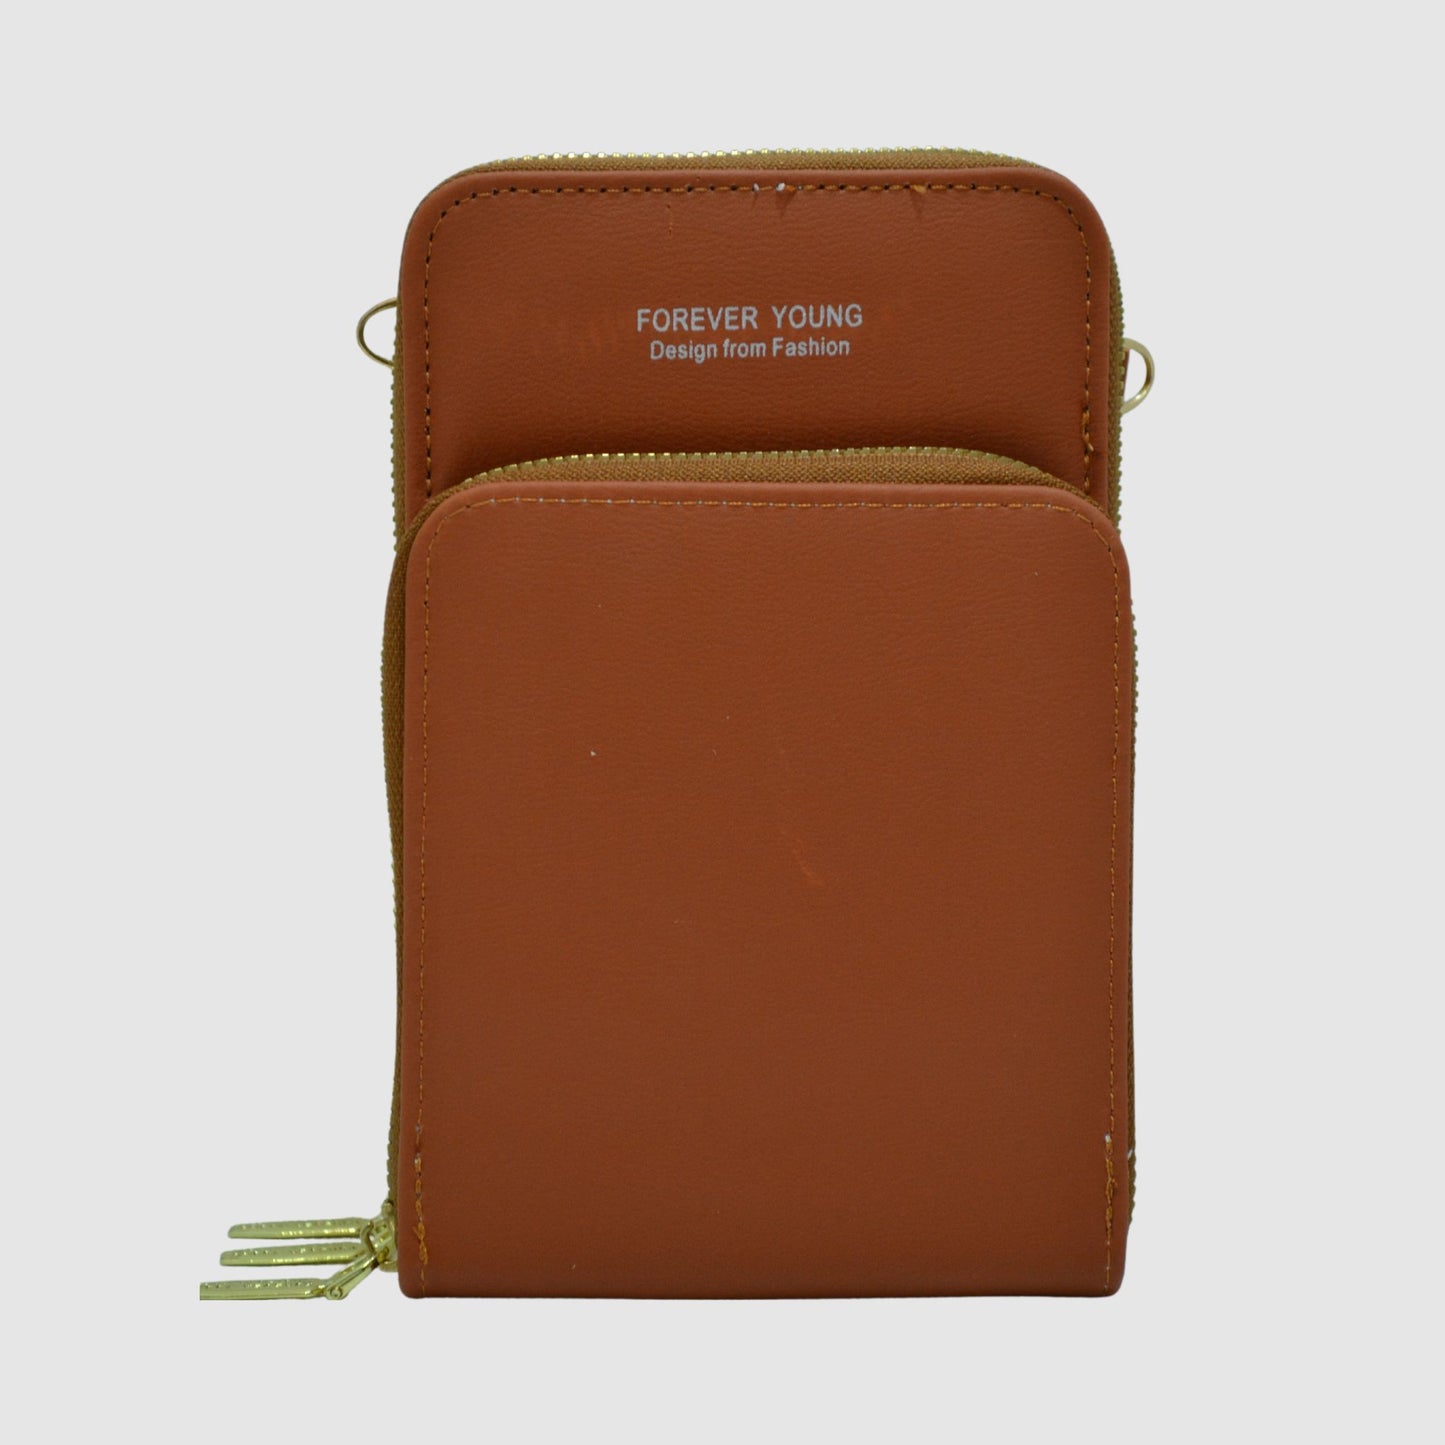 S3226 Forever Young Crossbody / Phone Bag